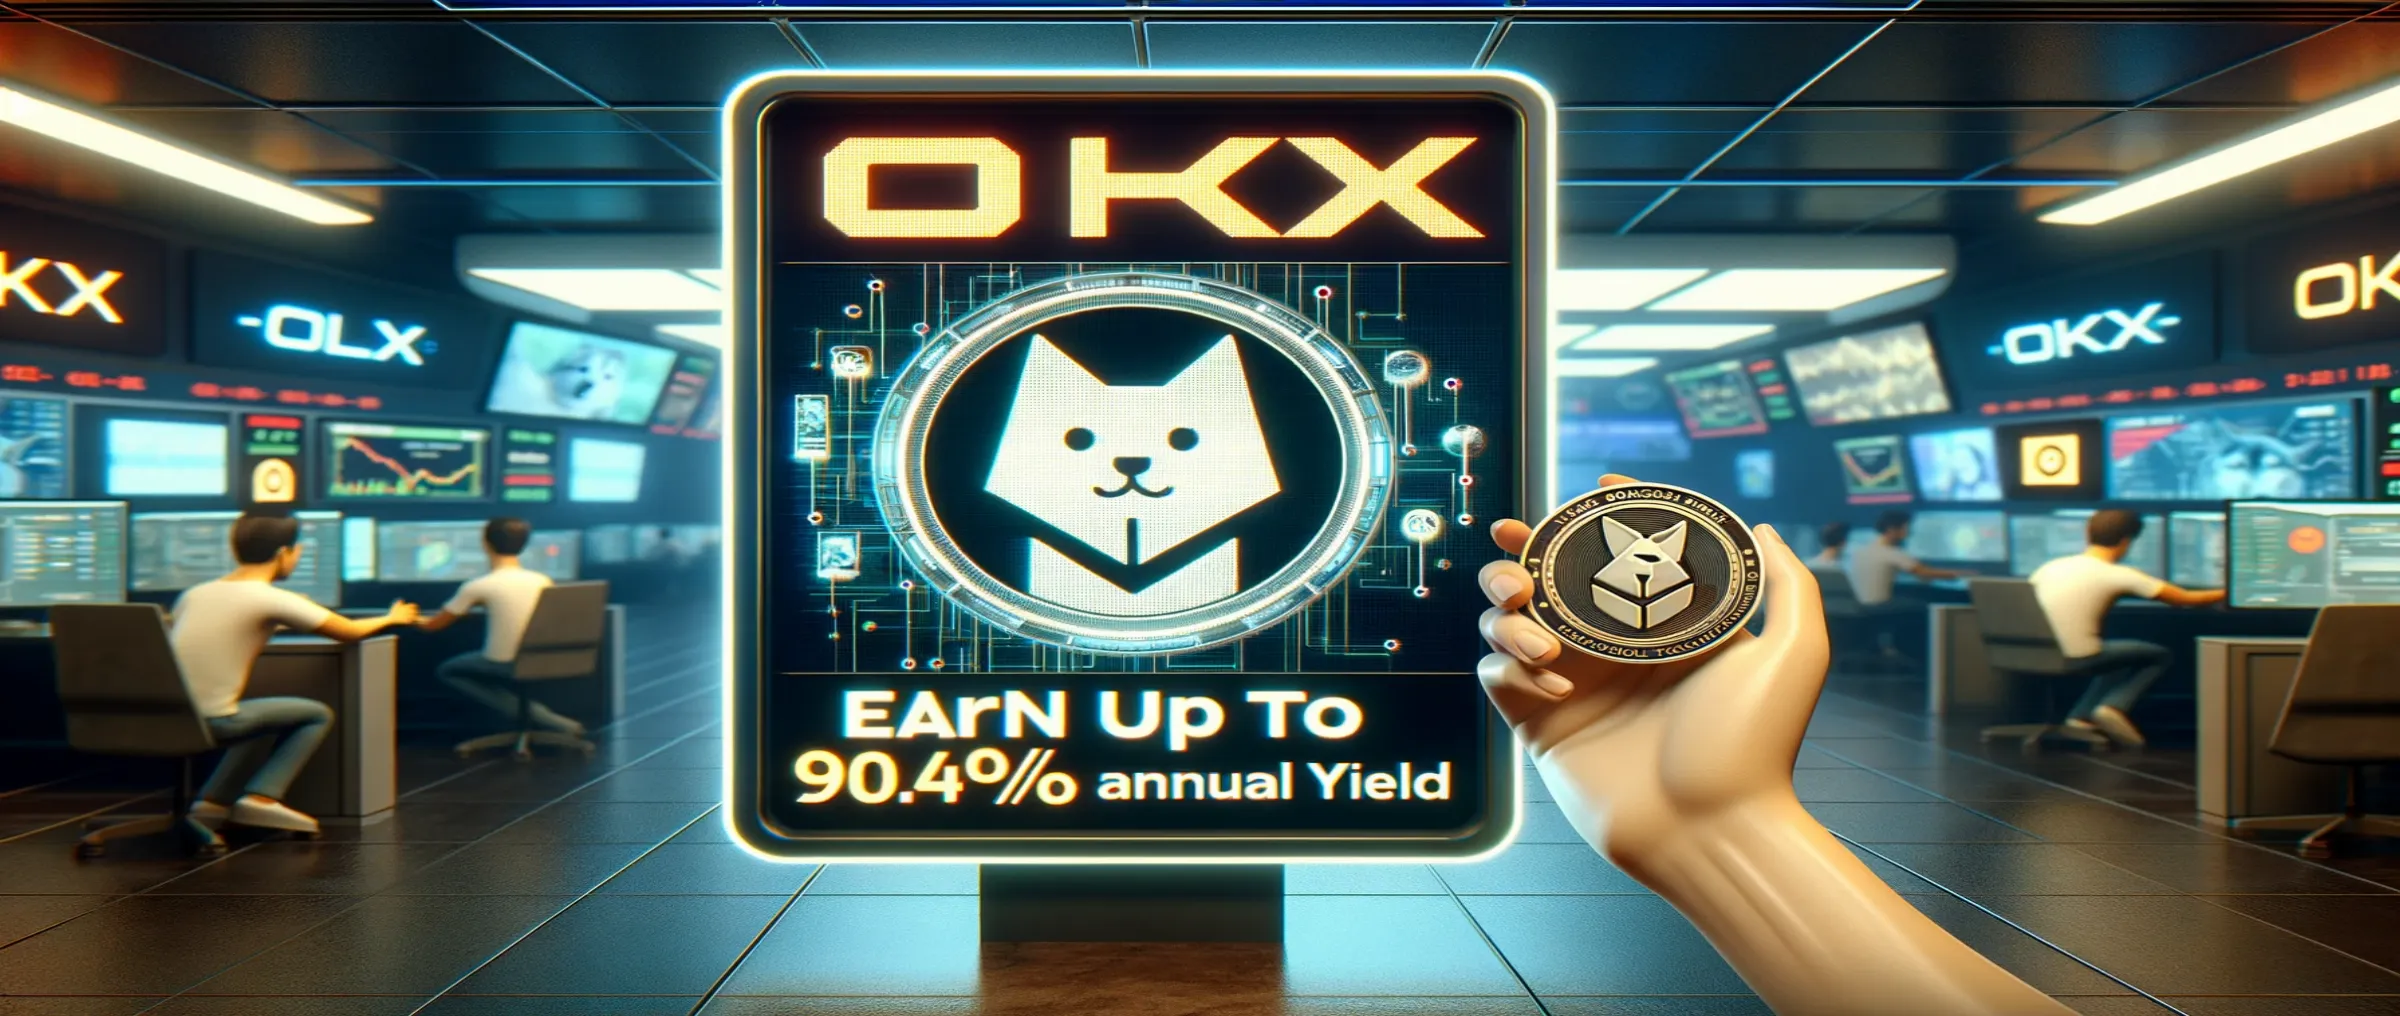 On the OKX exchange, you can get up to 90.47% per annum for blocking Floki